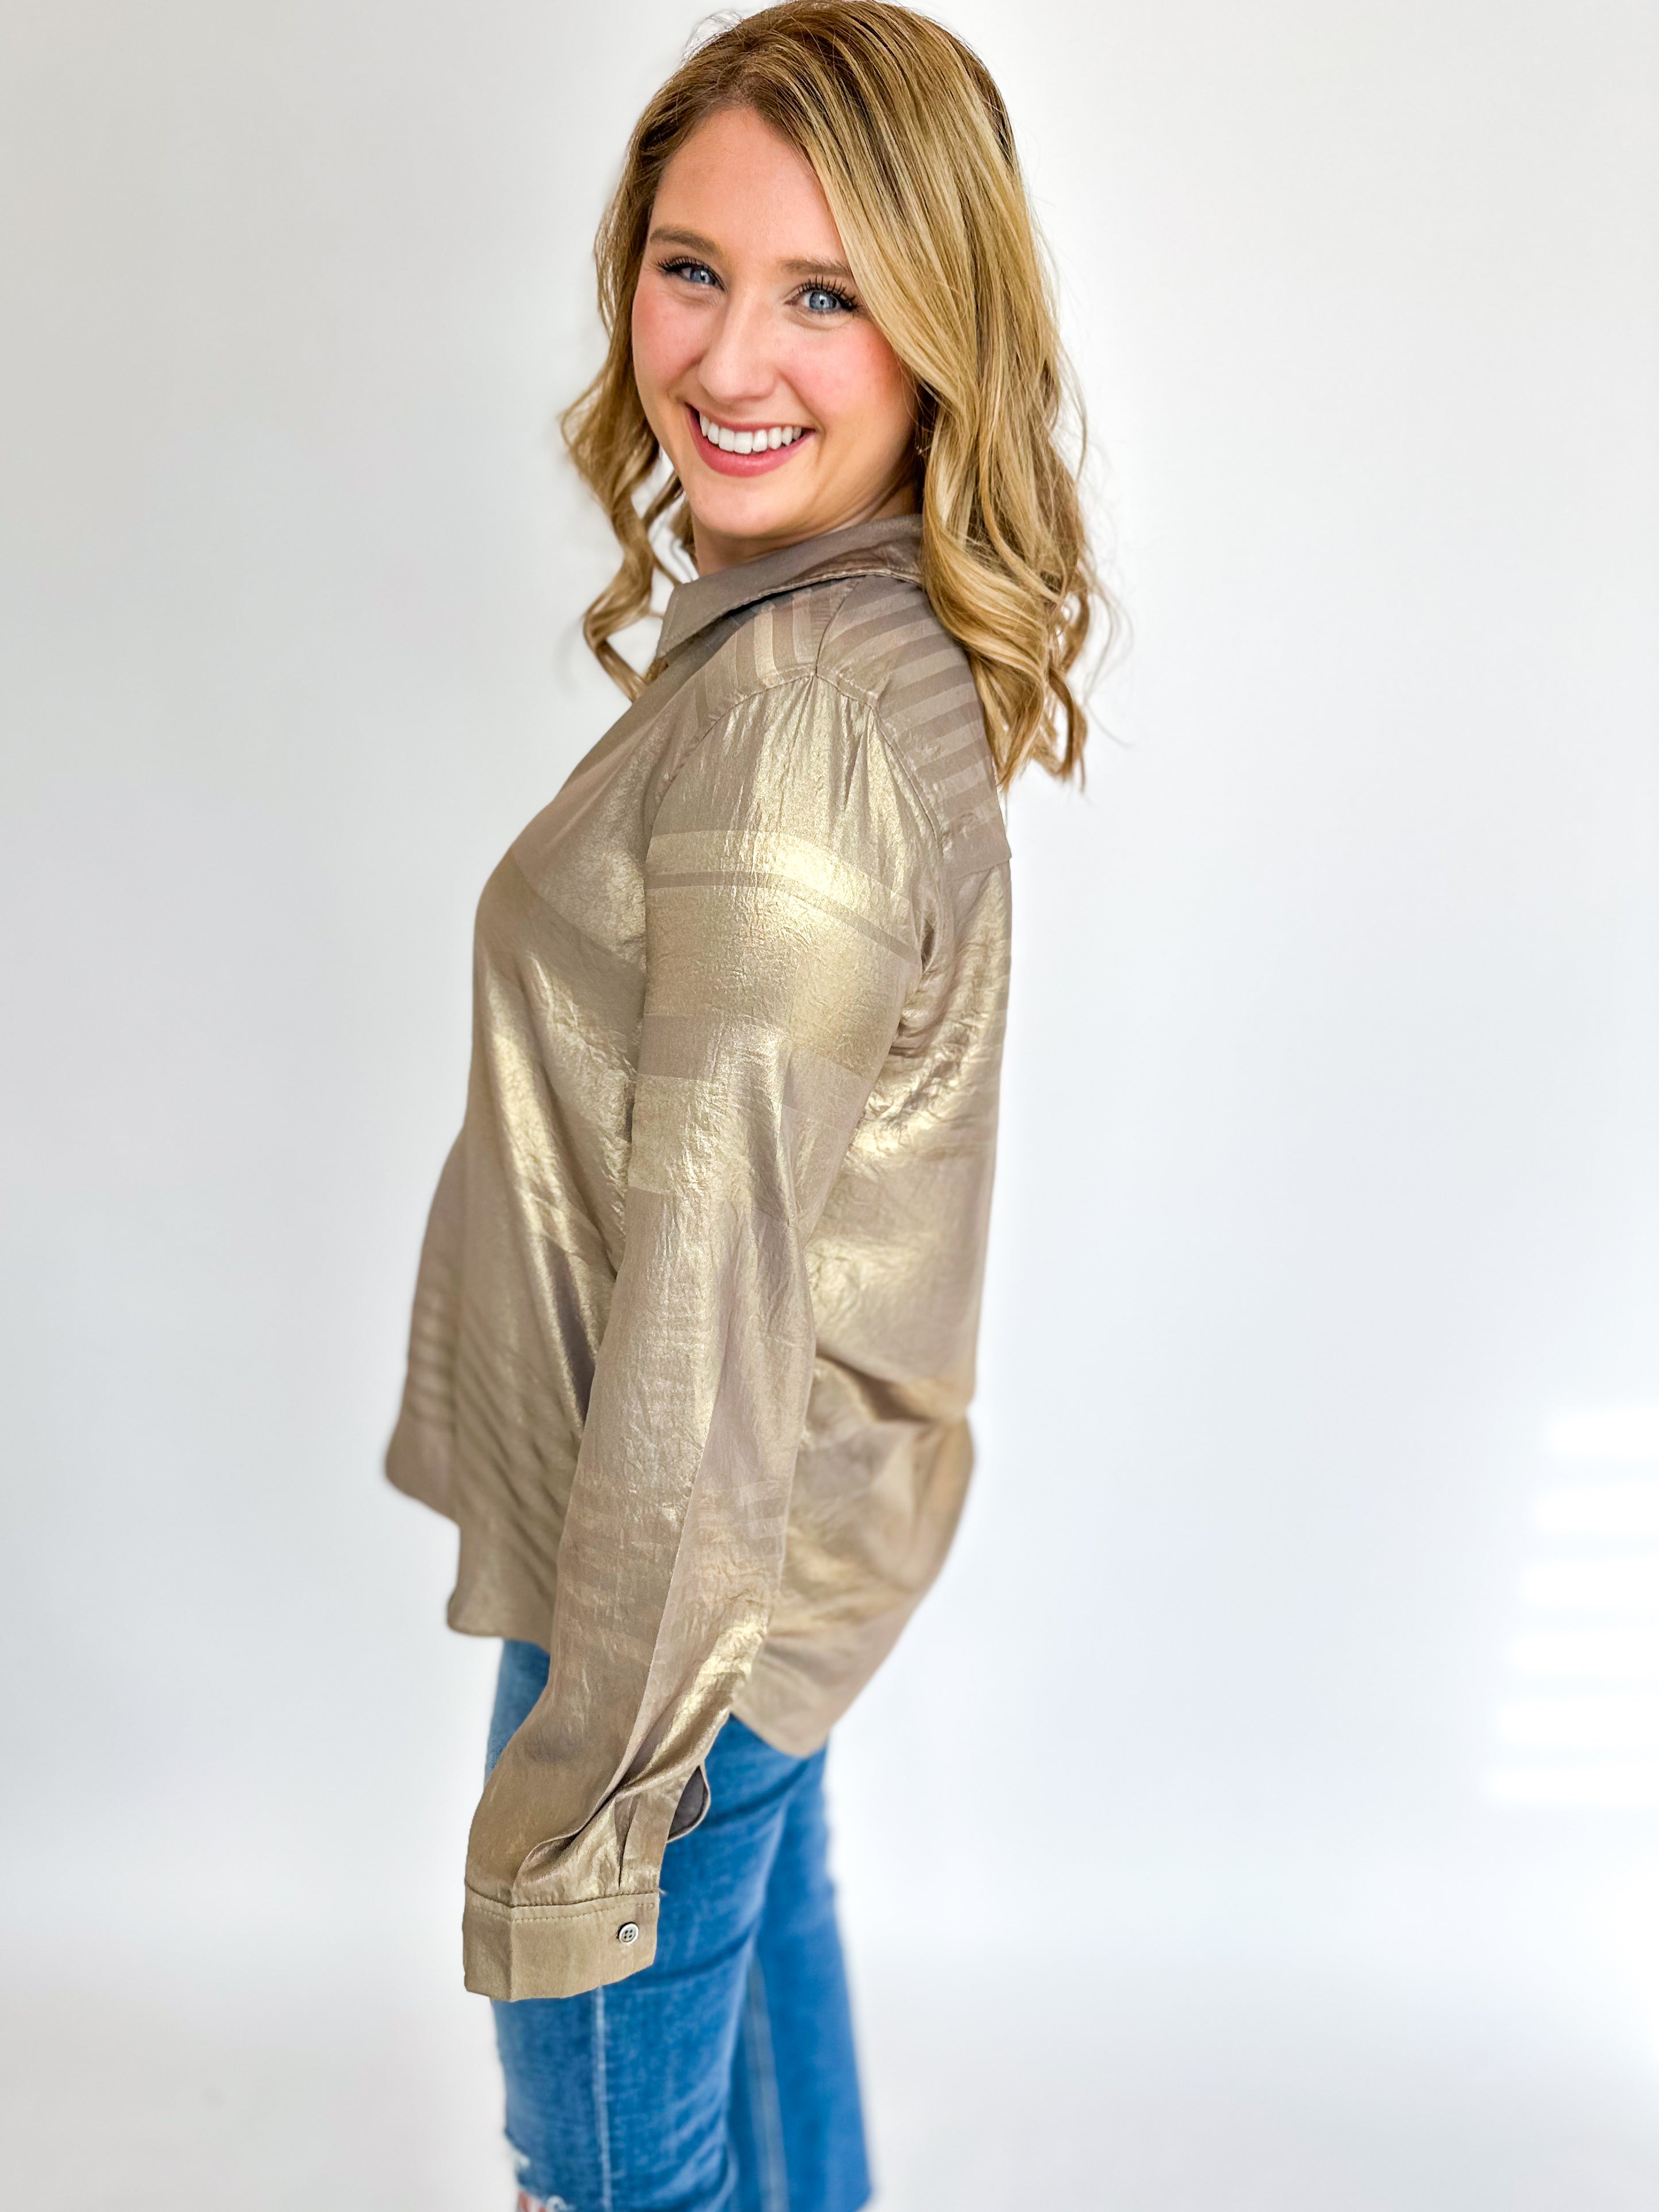 Be Present Blouse - Gold-200 Fashion Blouses-CURRENT AIR CLOTHING-July & June Women's Fashion Boutique Located in San Antonio, Texas